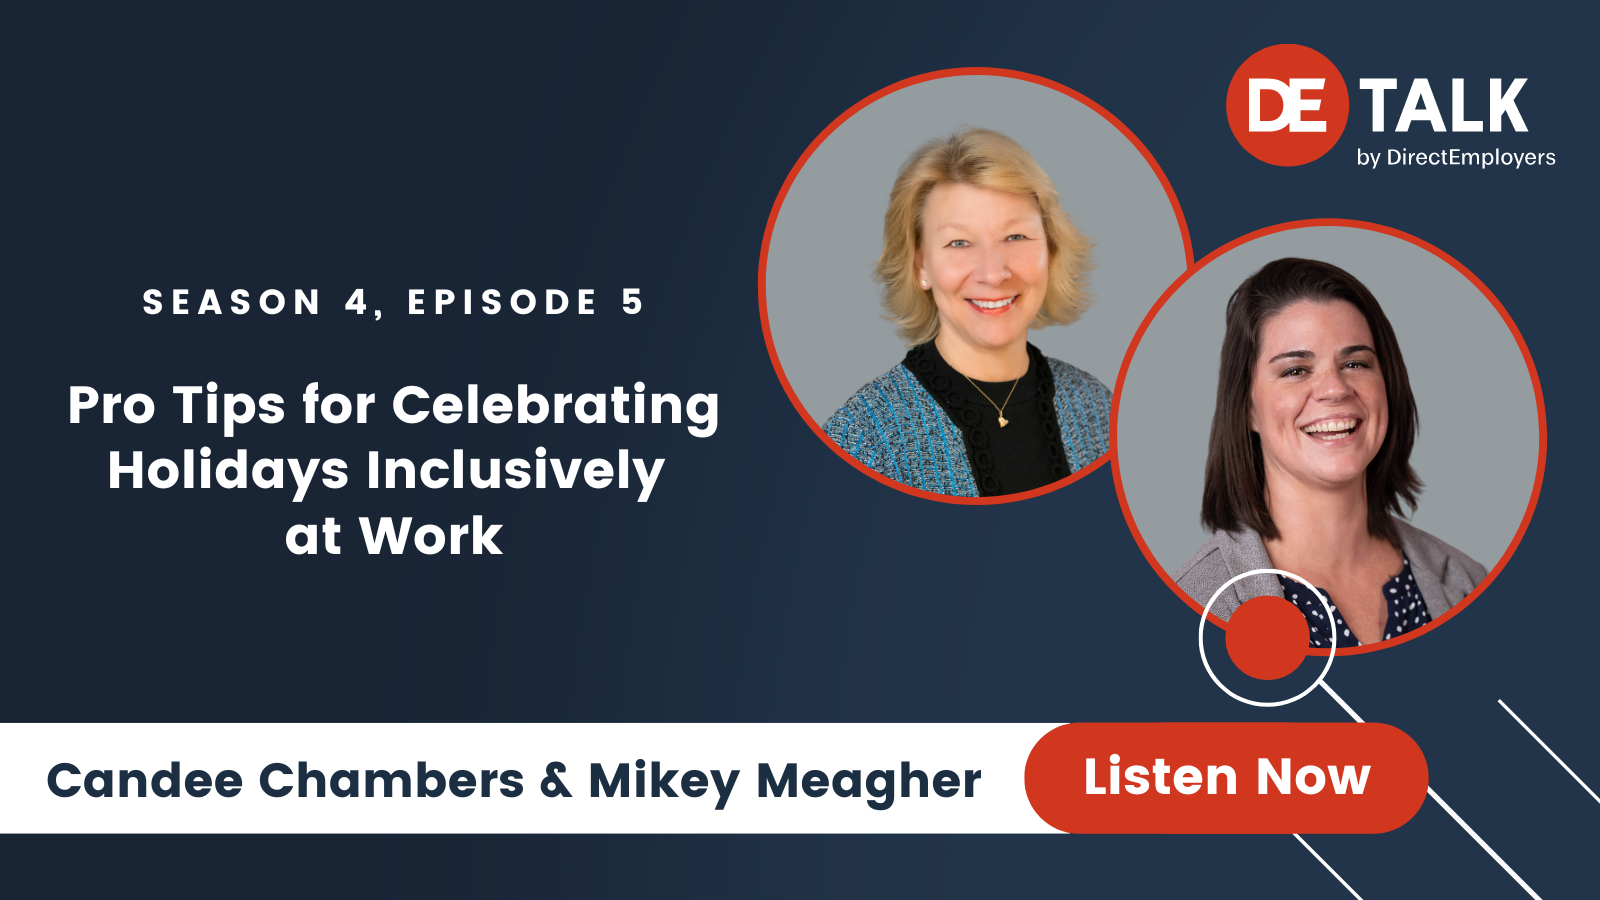 DE Talk | Season 4, Episode 5 | Pro Tips for Celebrating Holidays Inclusively at Work with Candee Chambers & Mikey Meagher